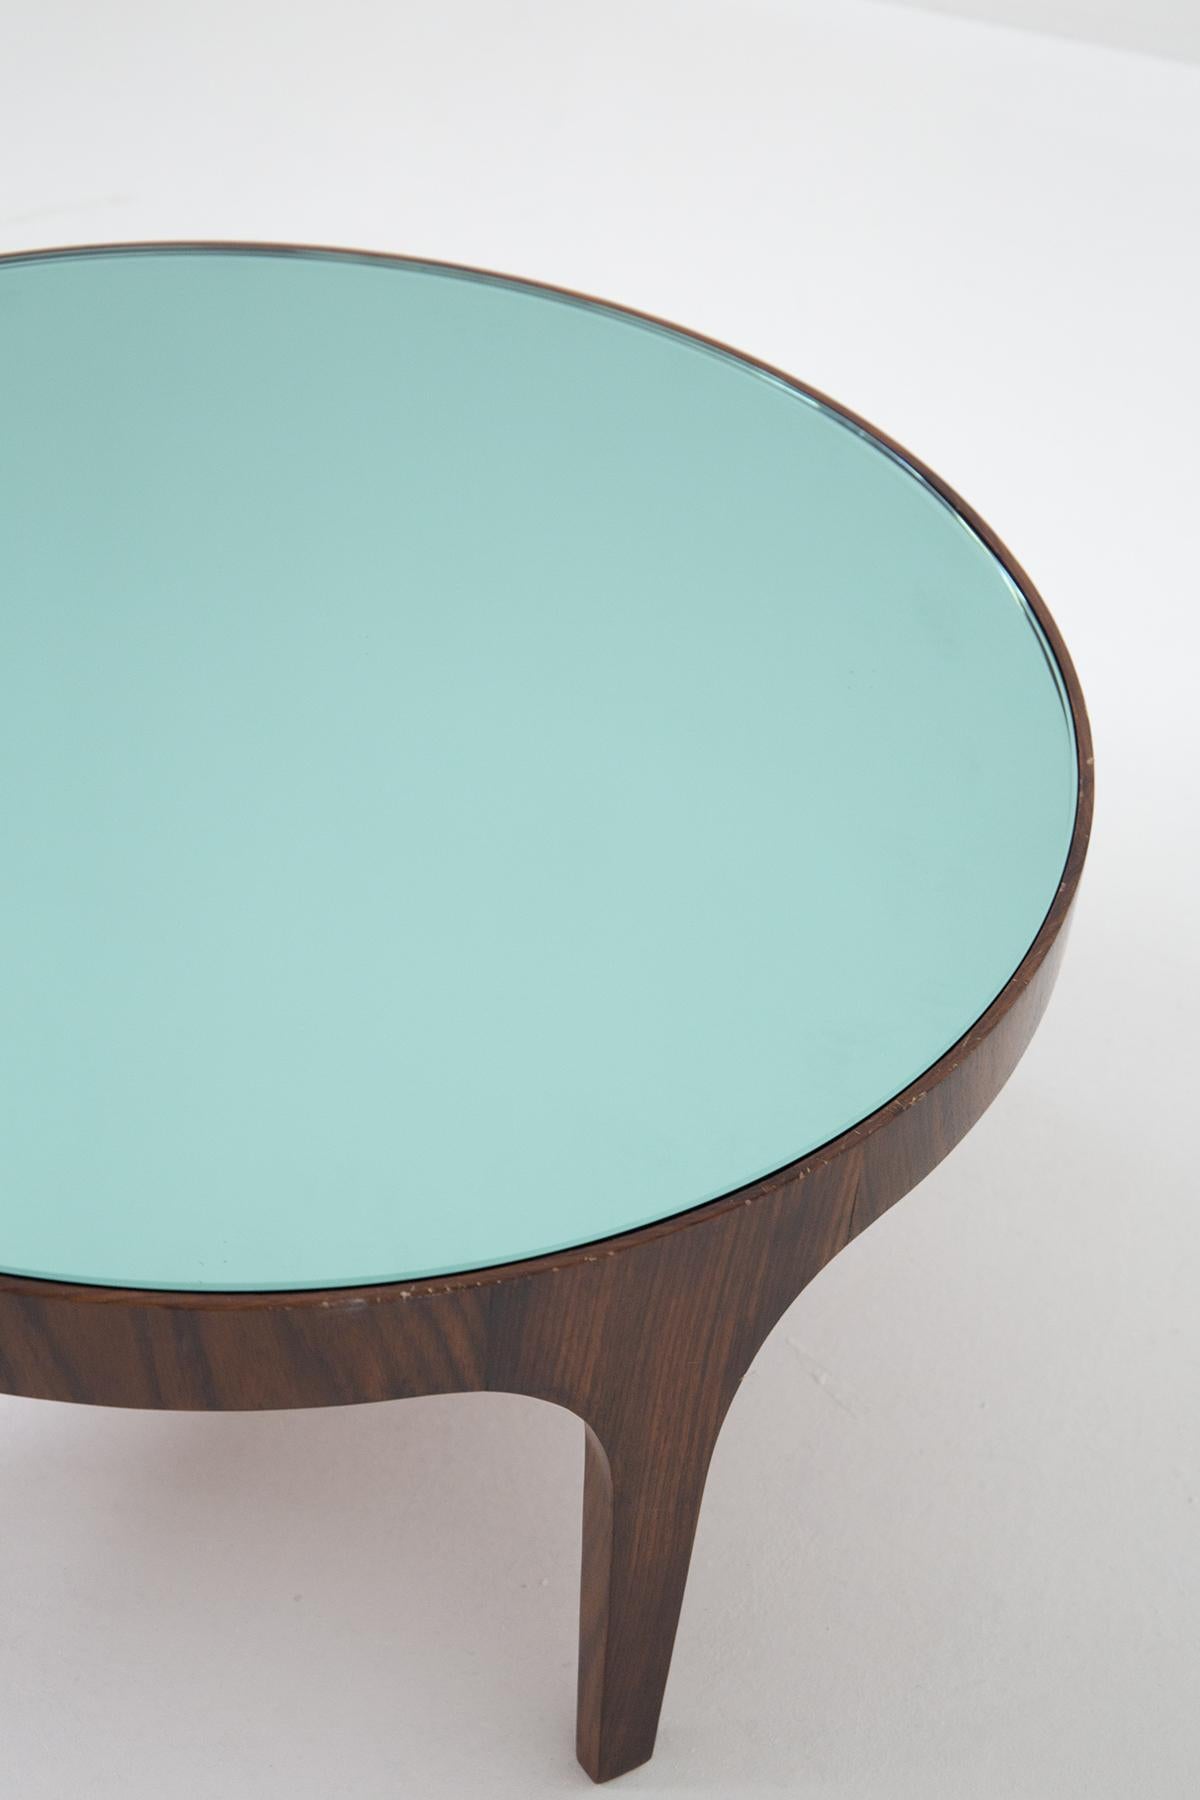 Coffe Table with Light Blue Glass by Fontana Arte, Manufacturer's Label 3